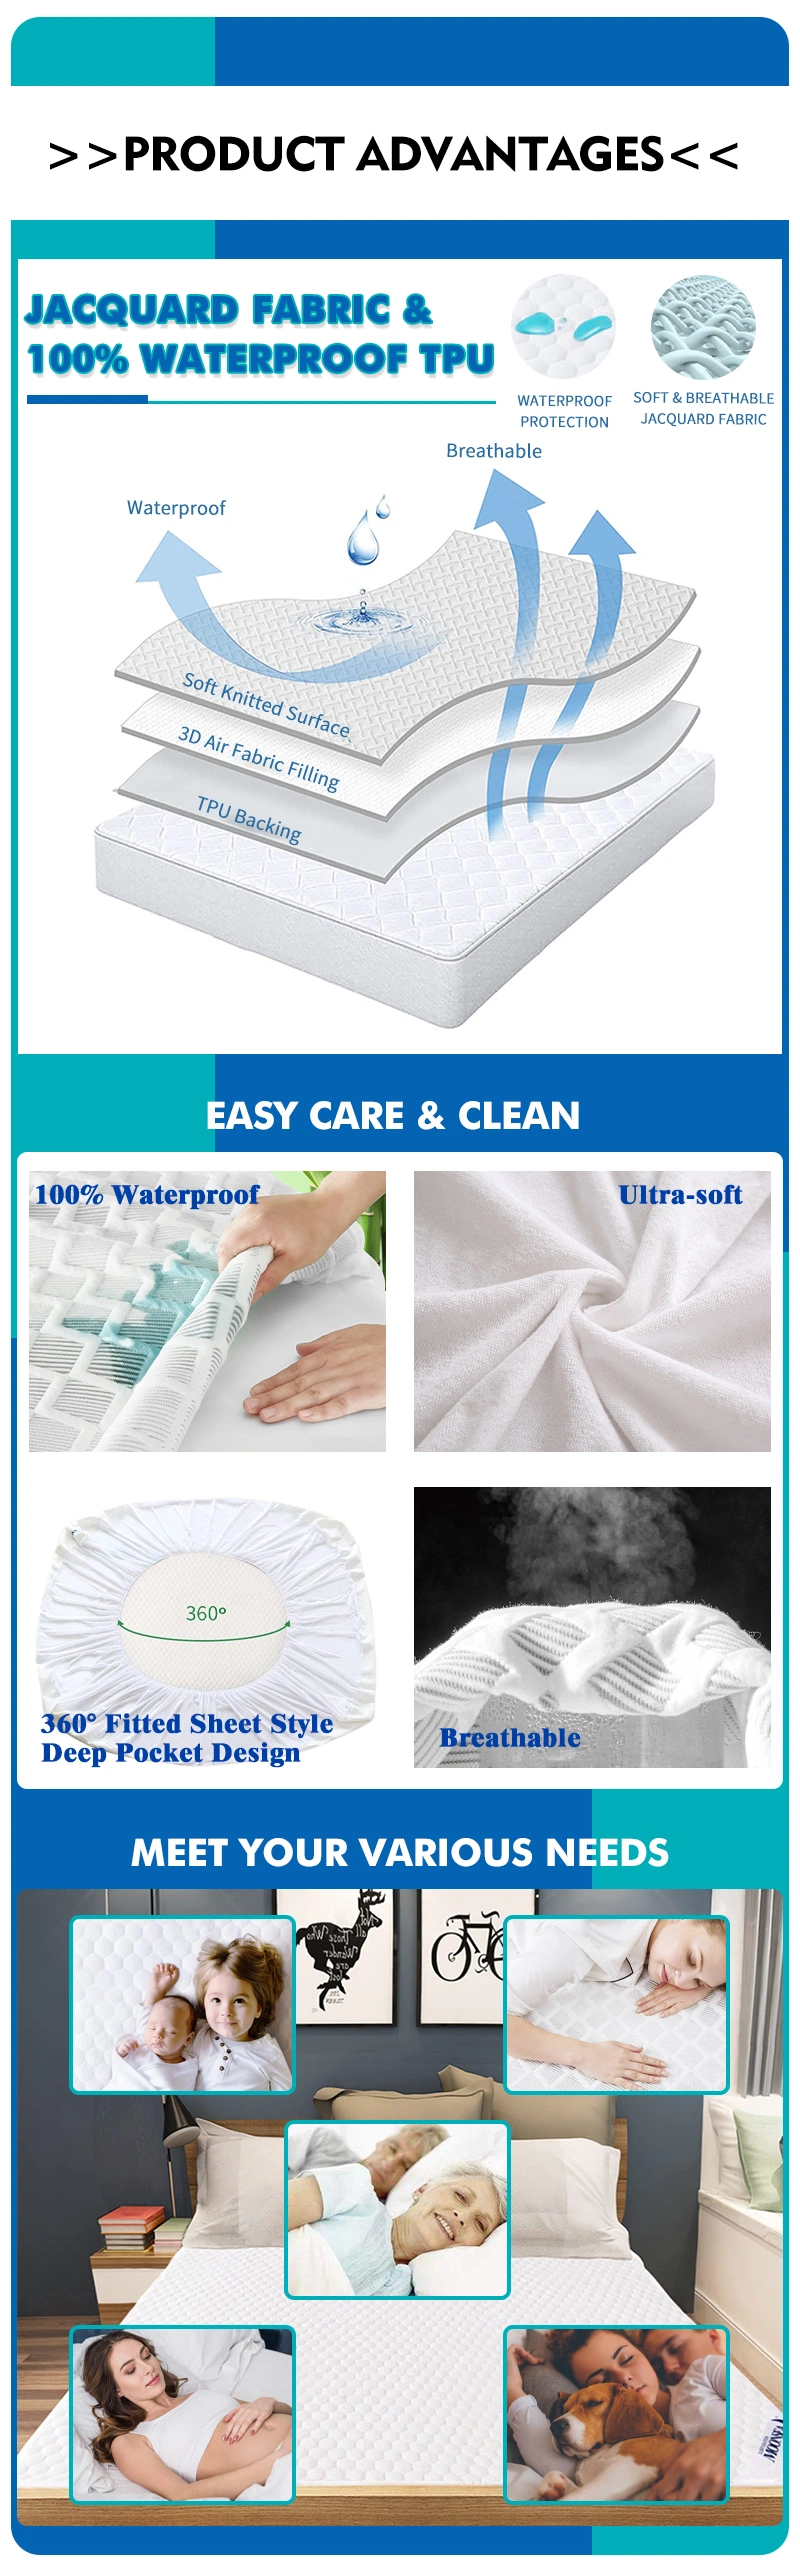 Wholesale Cooling Breathable Waterproof 100% Natural Bamboo Mattress Cover Protector